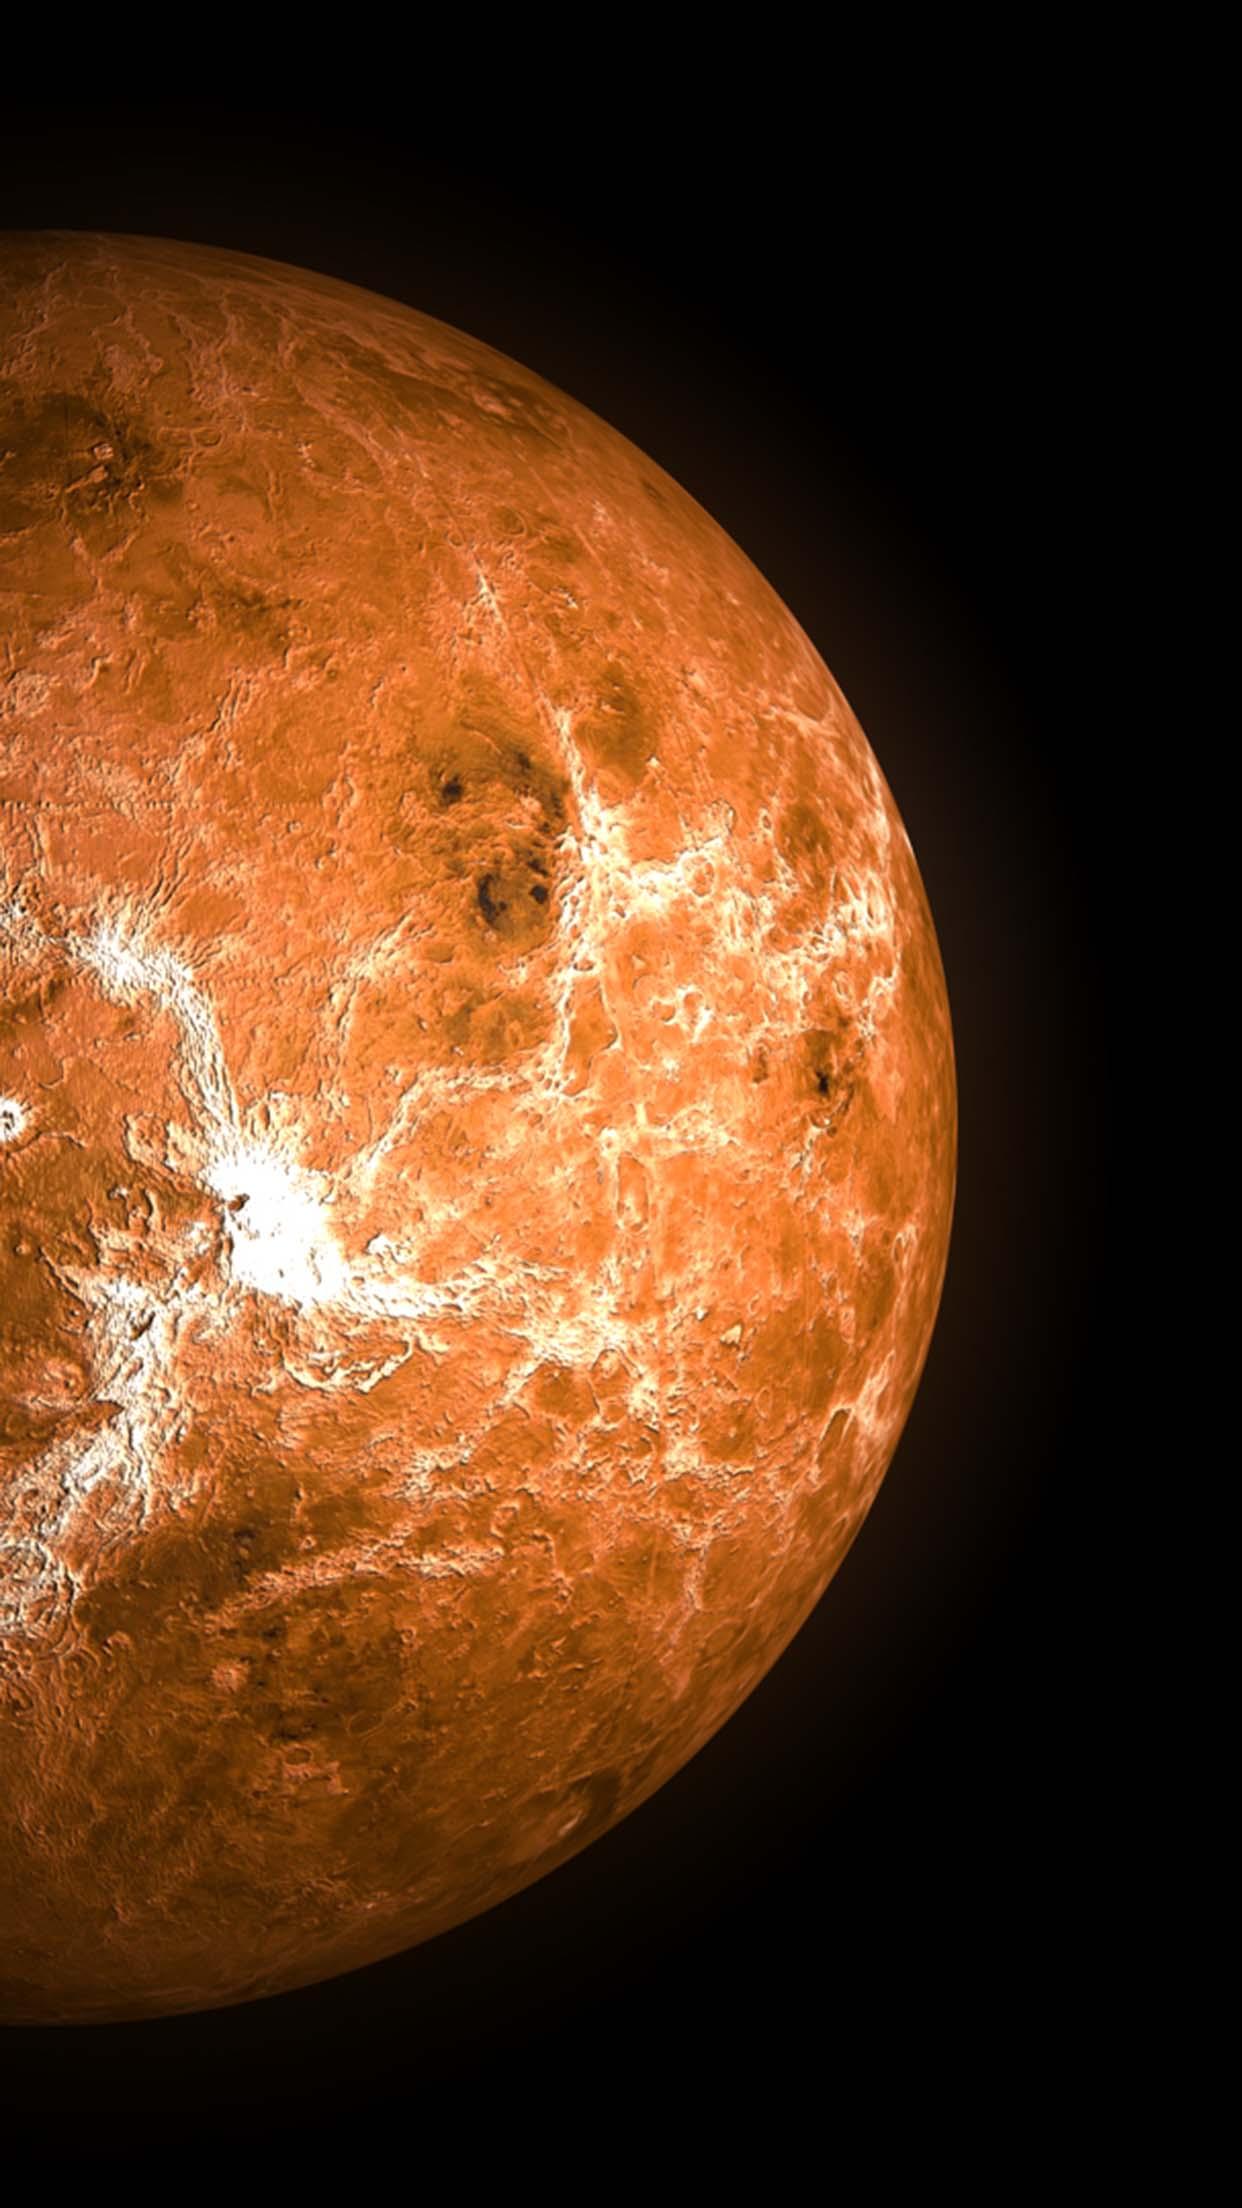 Venus planet 2 Wallpapers for iPhone X, 8, 7, 6